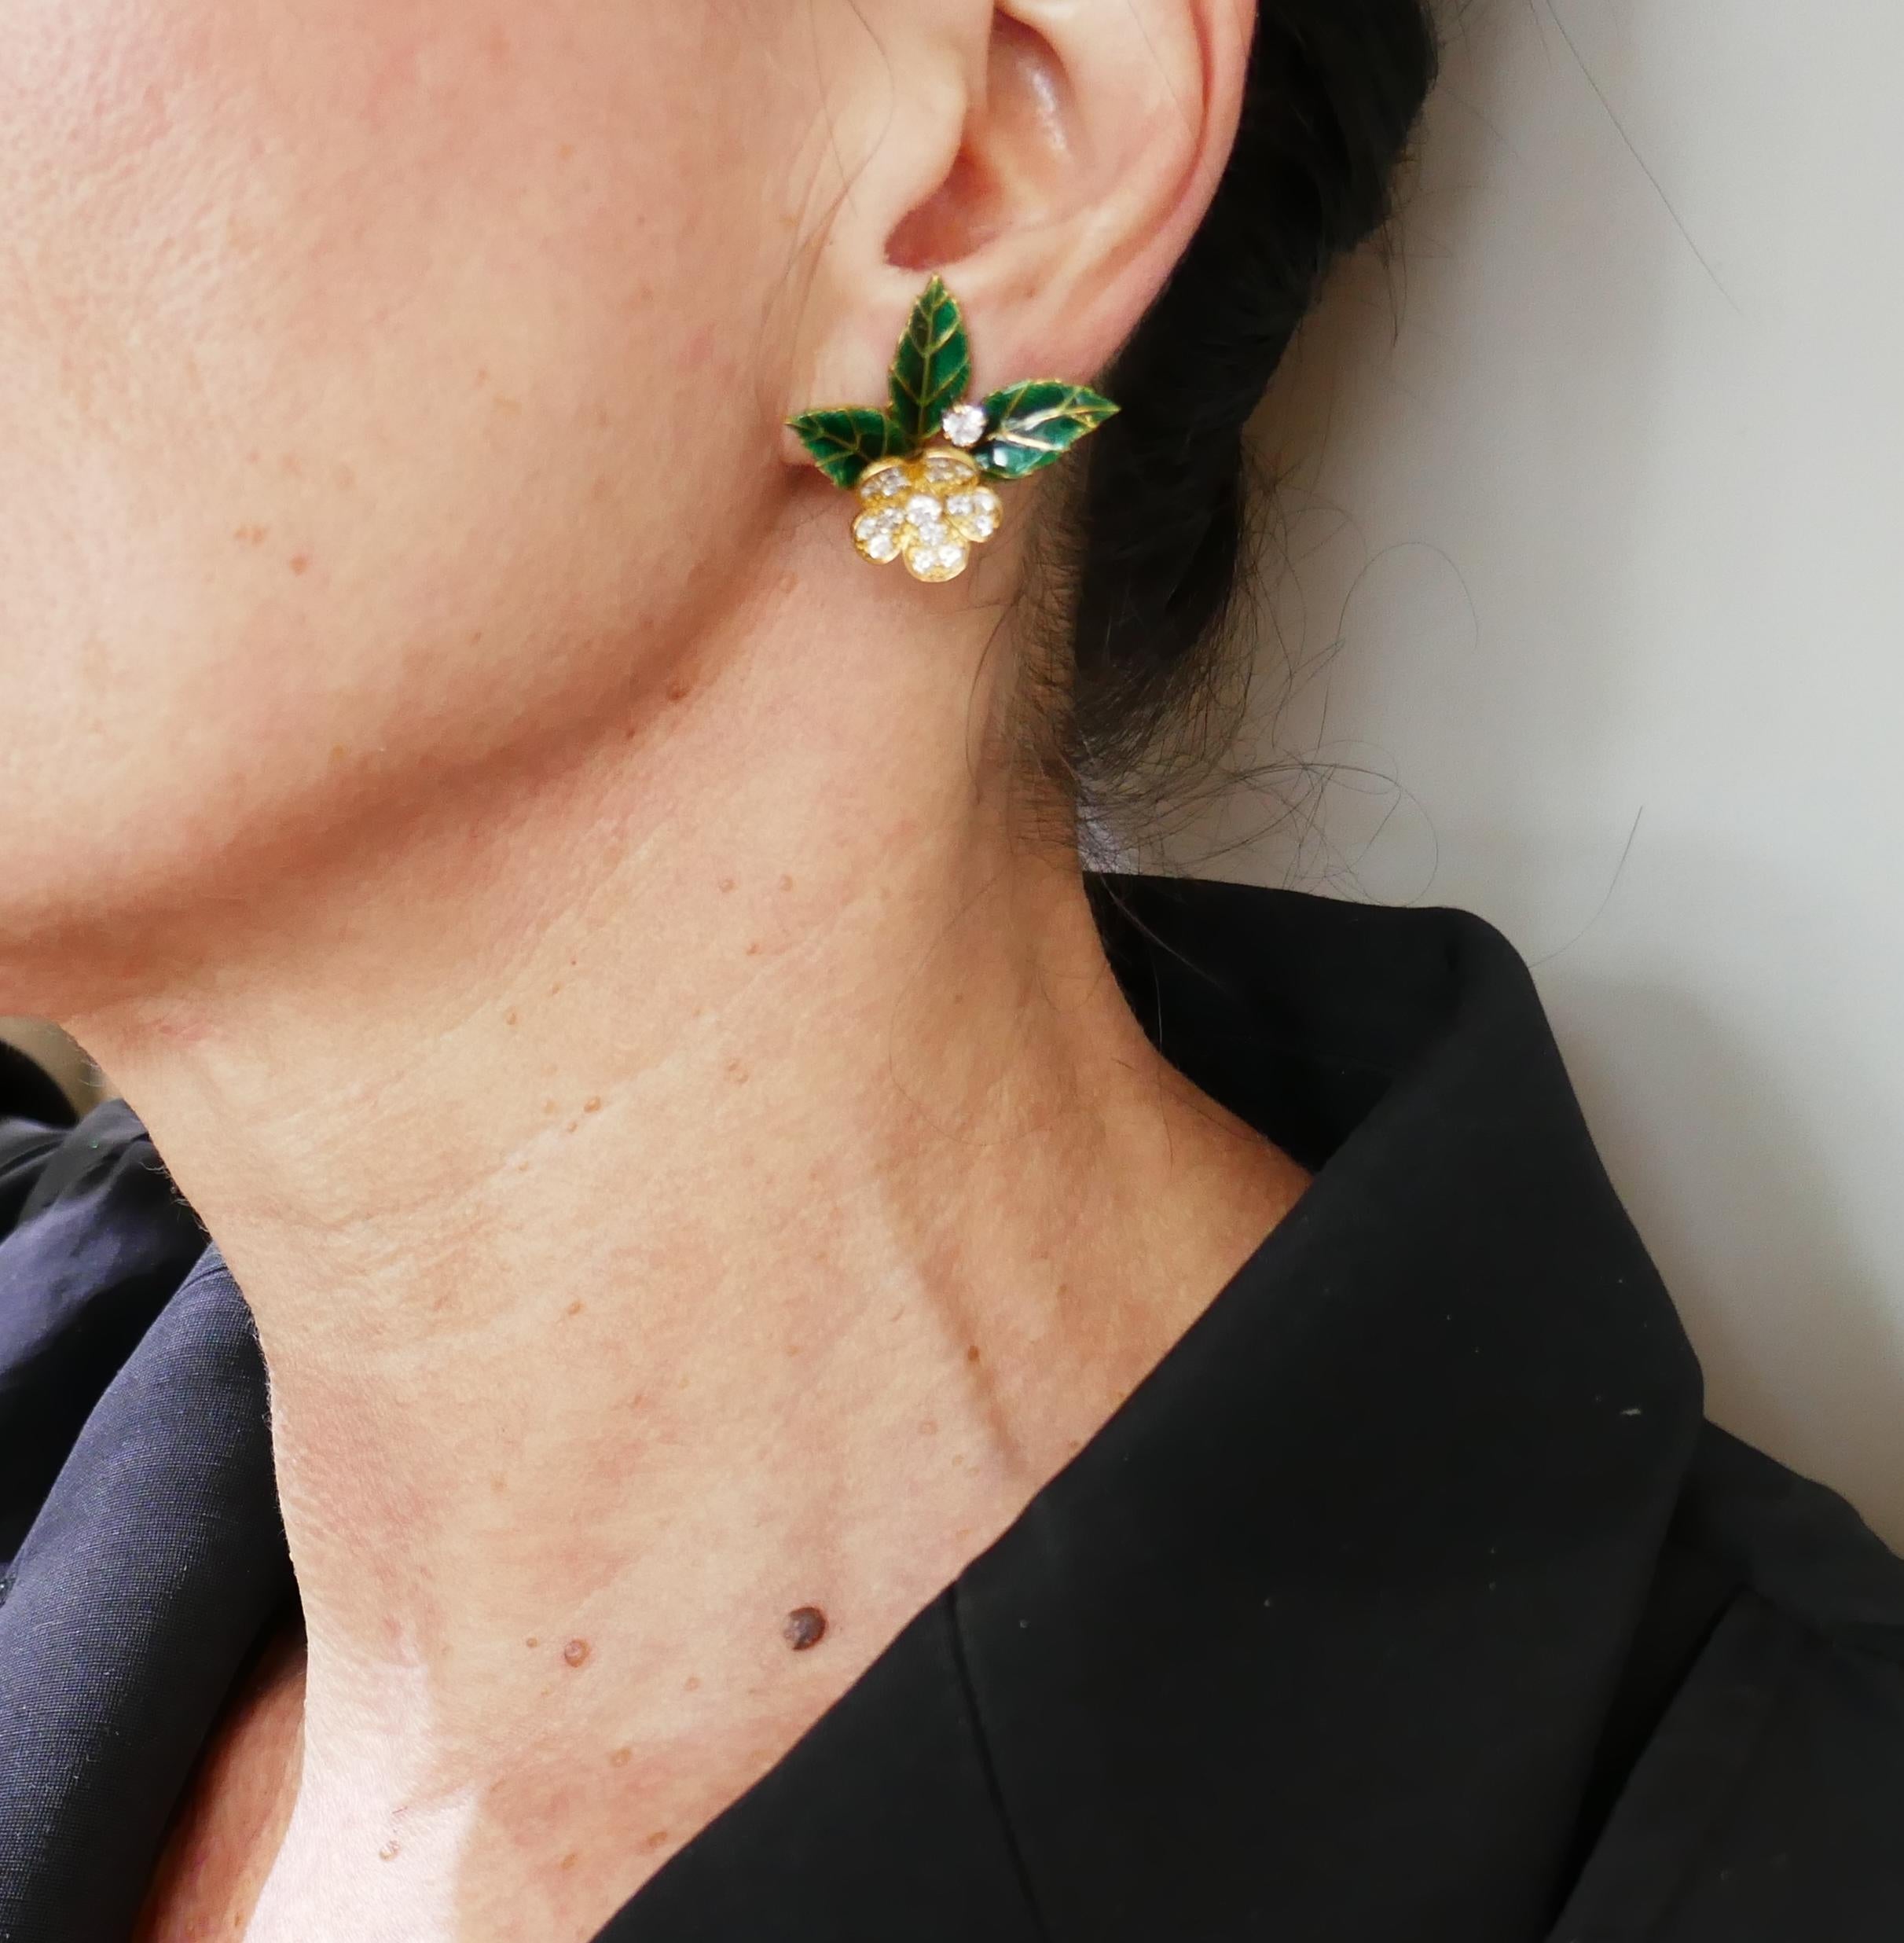 A pair of feminine and French chic earrings created by Boucheron, Paris in the 1950's. Colorful, stylish and wearable, the earrings are a great addition to your jewelry collection.
The earrings are made of 18 karat yellow gold, tastefully decorated